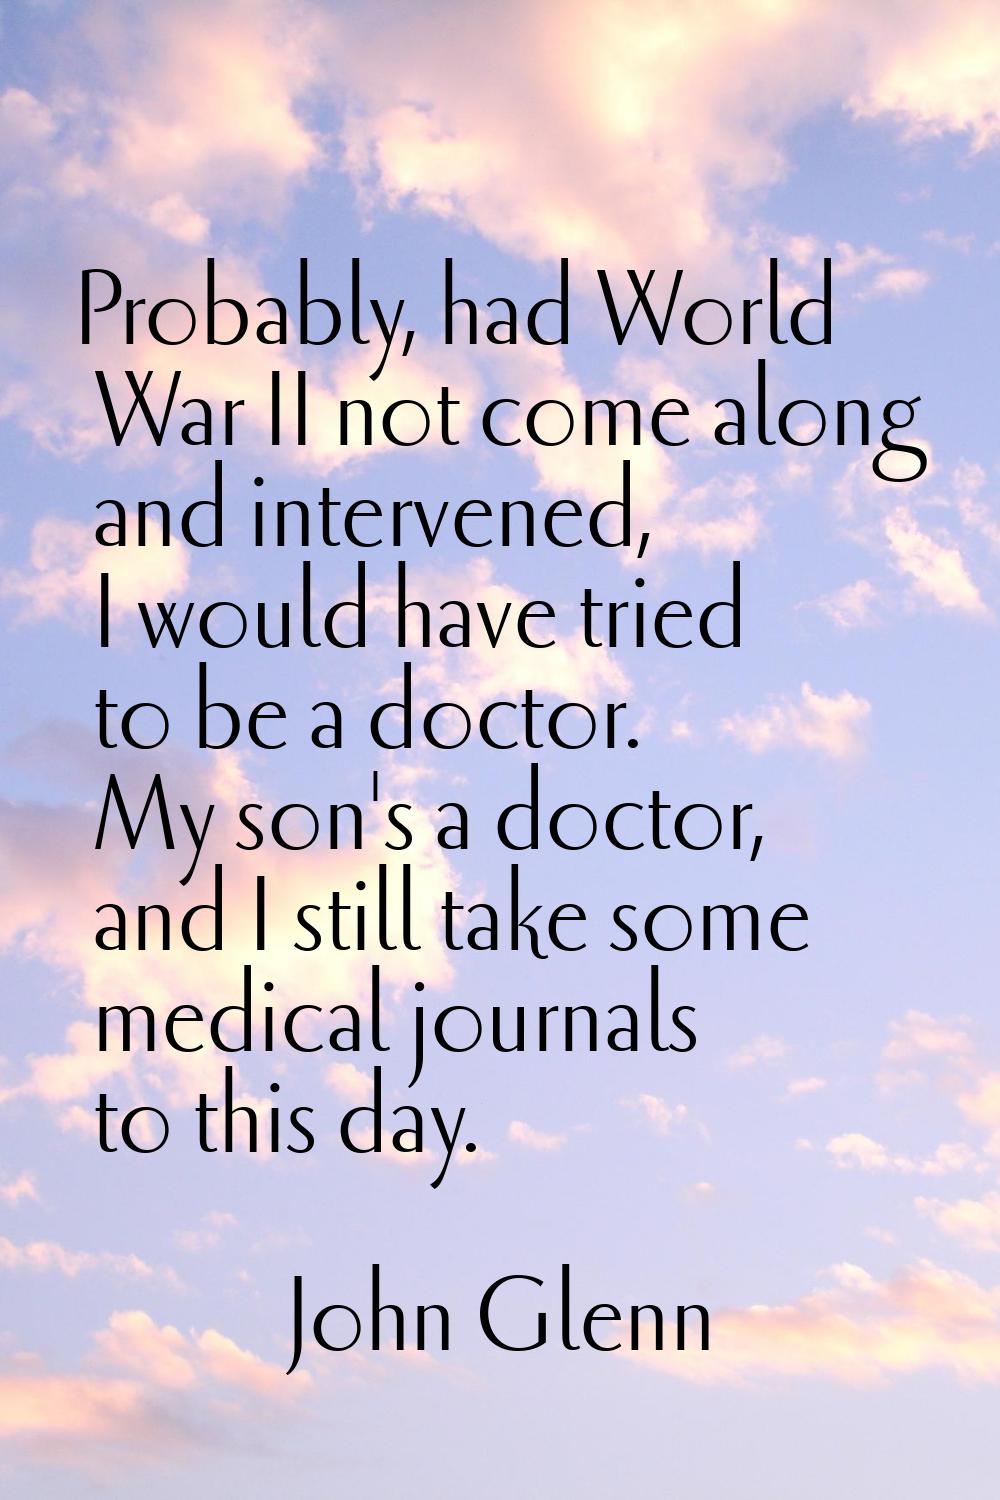 Probably, had World War II not come along and intervened, I would have tried to be a doctor. My son